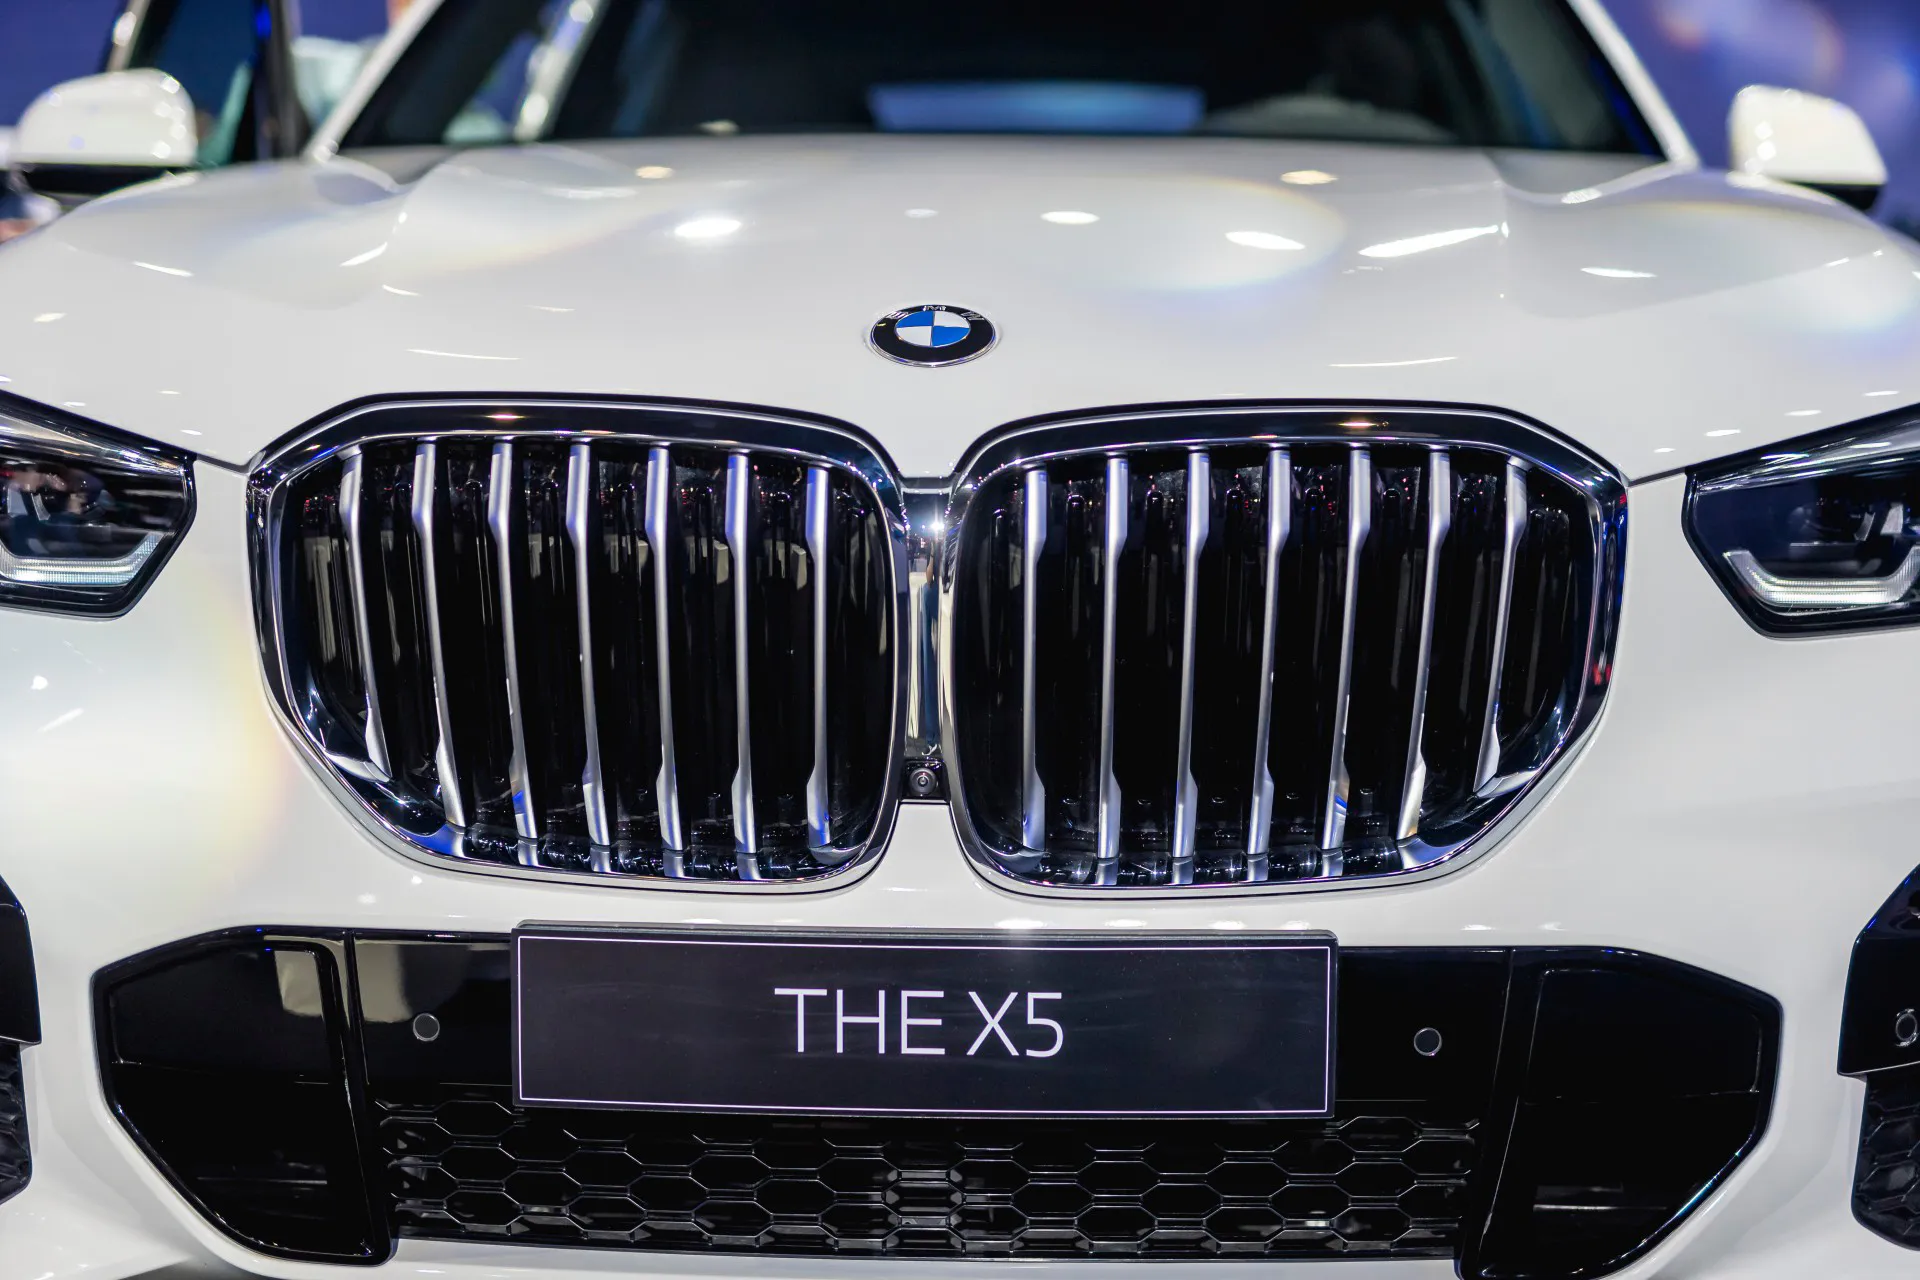 The iconic kidney grille of the 2023 BMW X5 on display at a motor show